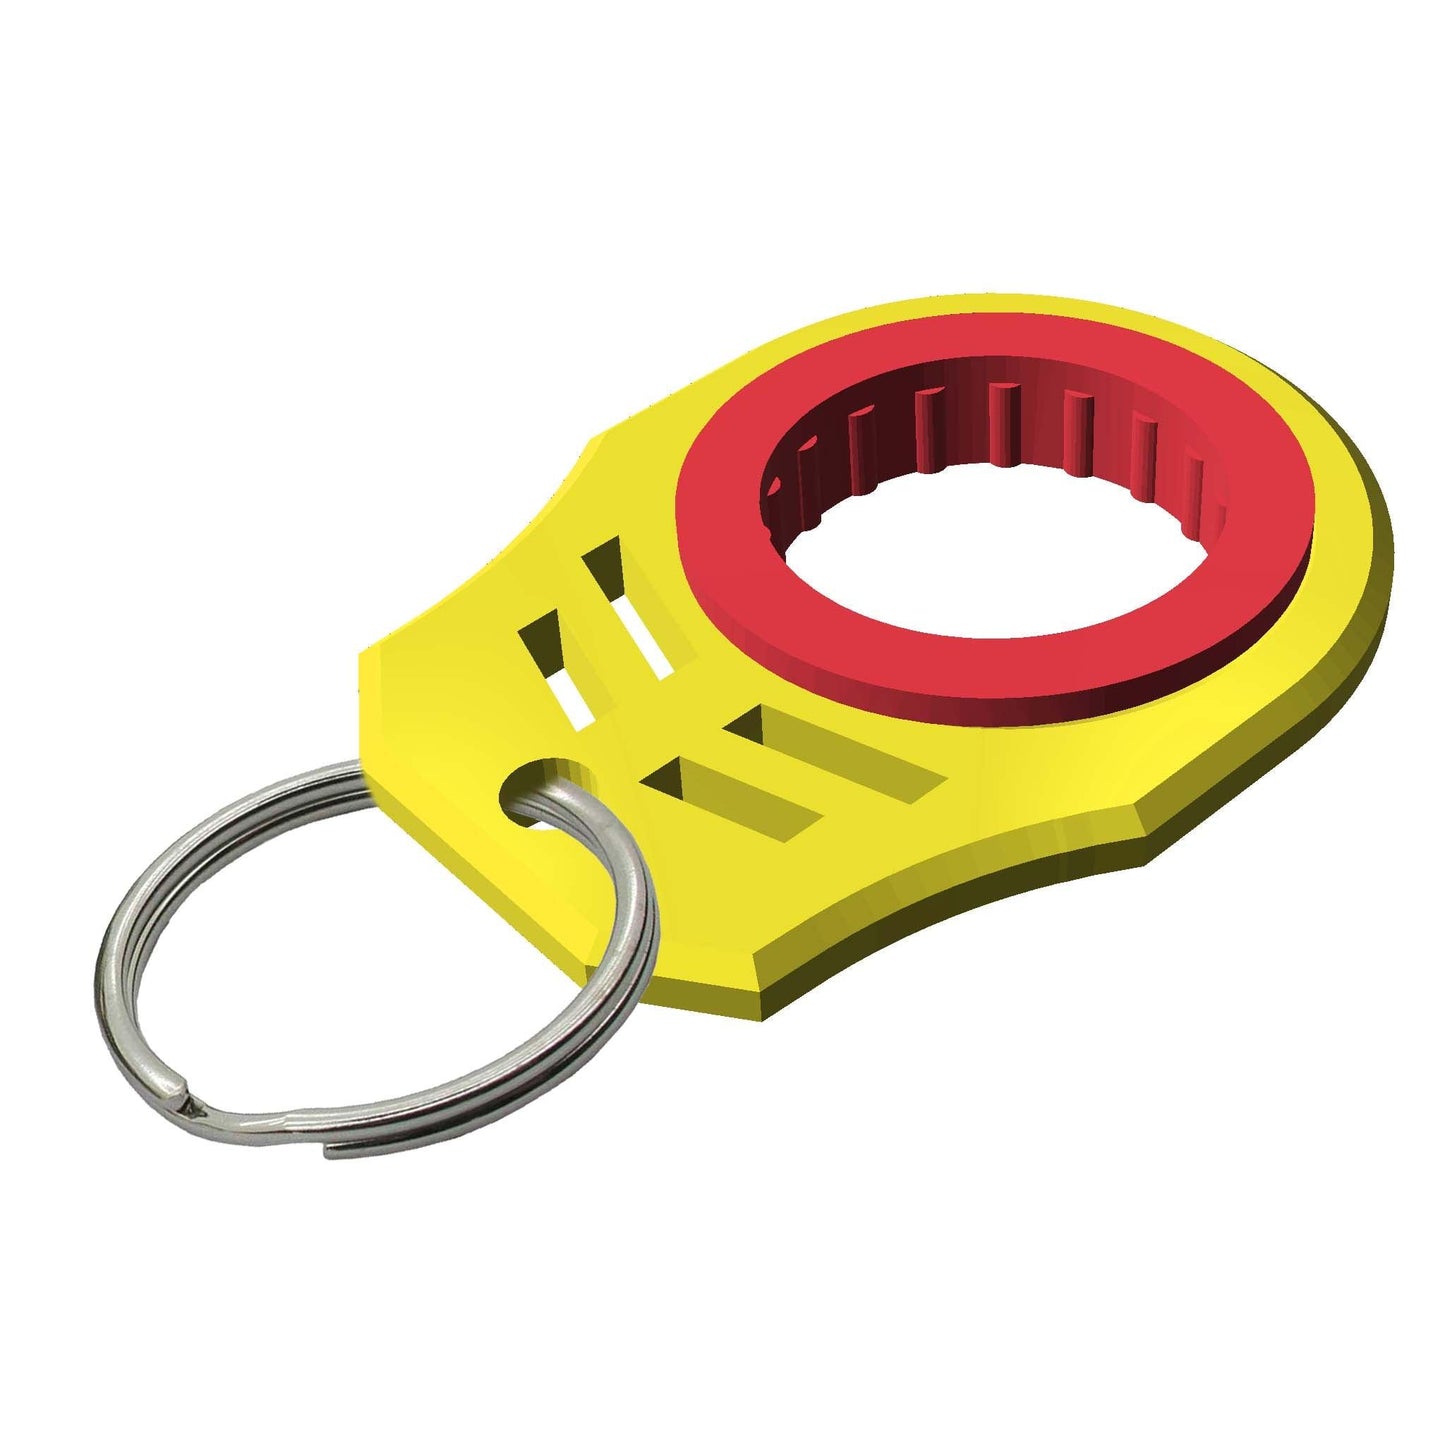 Sleek Key Spinner with Key Ring Attachment